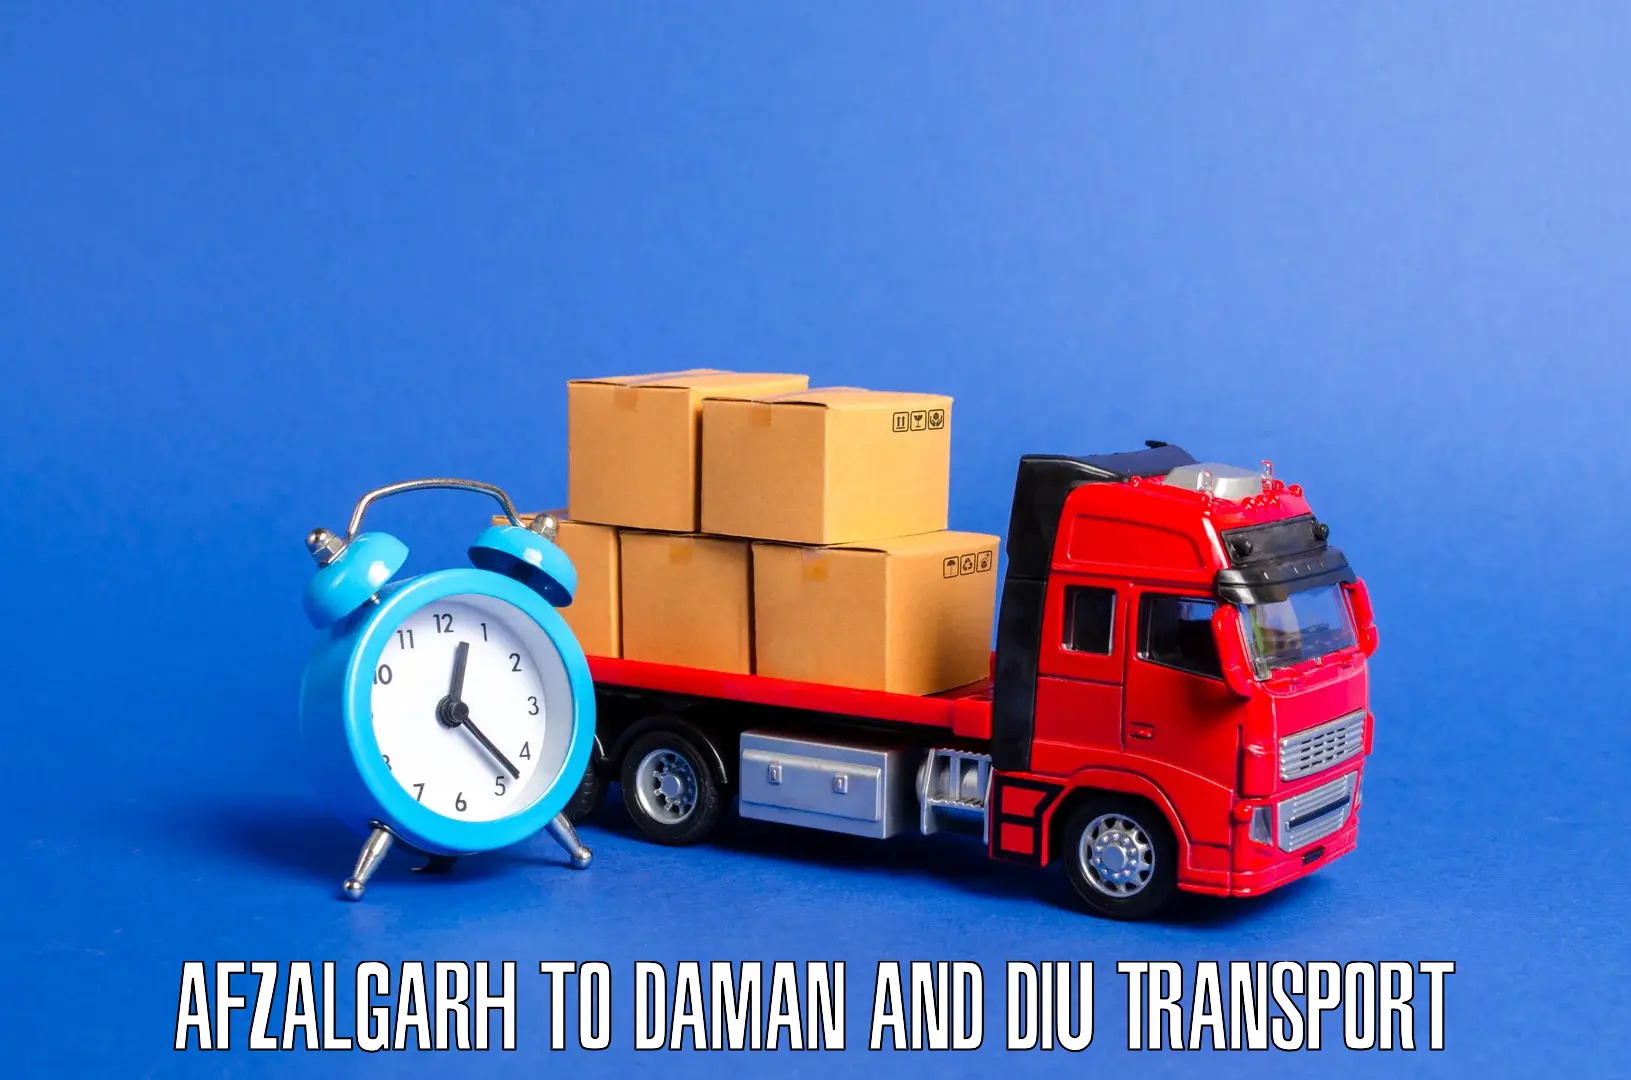 Parcel transport services Afzalgarh to Daman and Diu